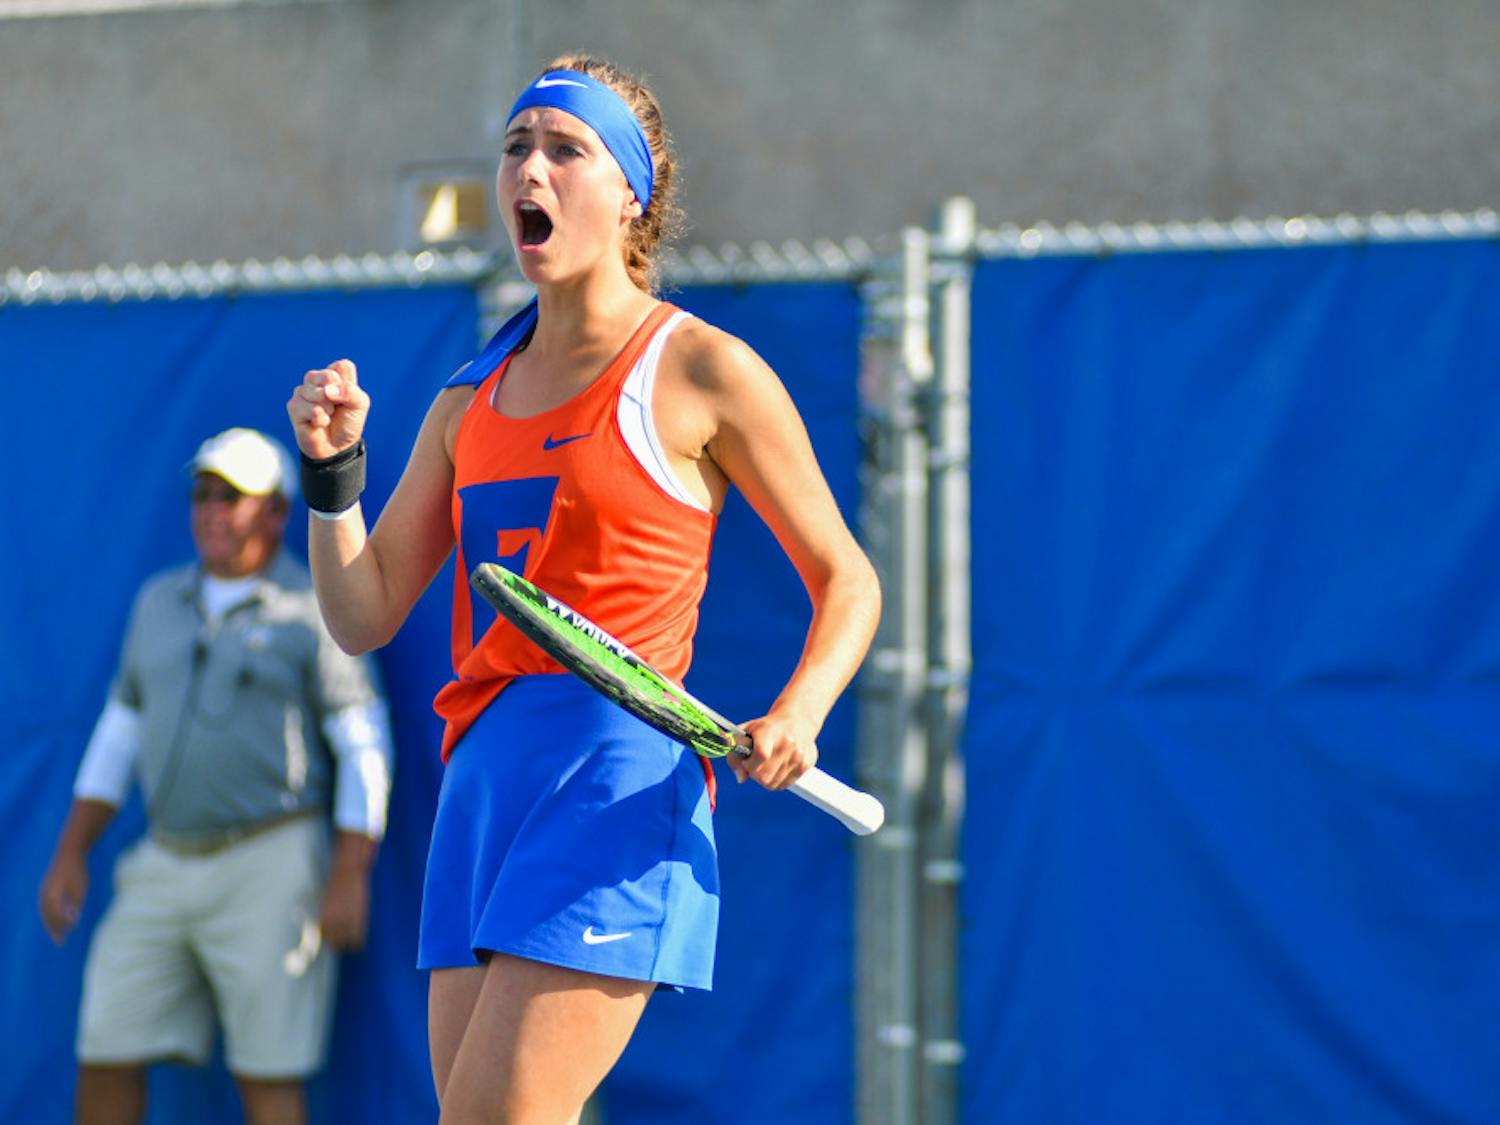 Junior McCartney Kessler lost in doubles with junior Victoria Emma against Oklahoma State 7-6(3) on Friday and again on Sunday against Tennessee 7-5. In singles play, Kessler posted two wins against Oklahoma State (Saturday) and Miami (Sunday).